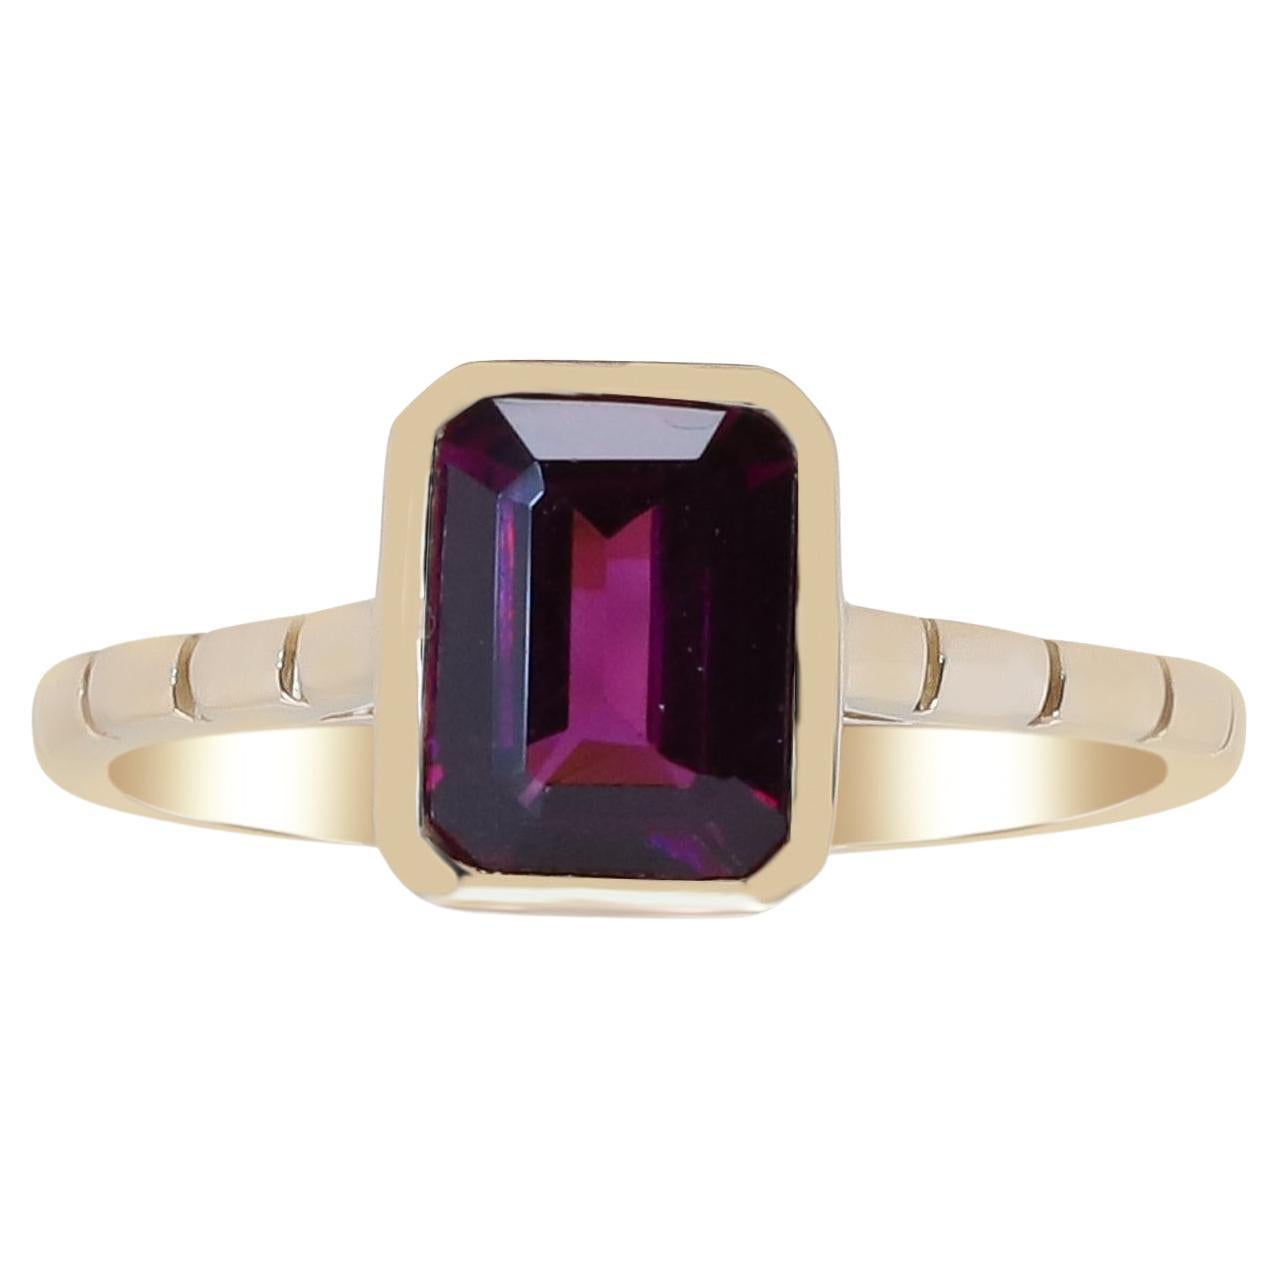 Gin and Grace Classic Rodholite with 14k Yellow Gold Ring For Women/Girls (Bague classique en Rodholite et or jaune 14k pour femmes/filles)